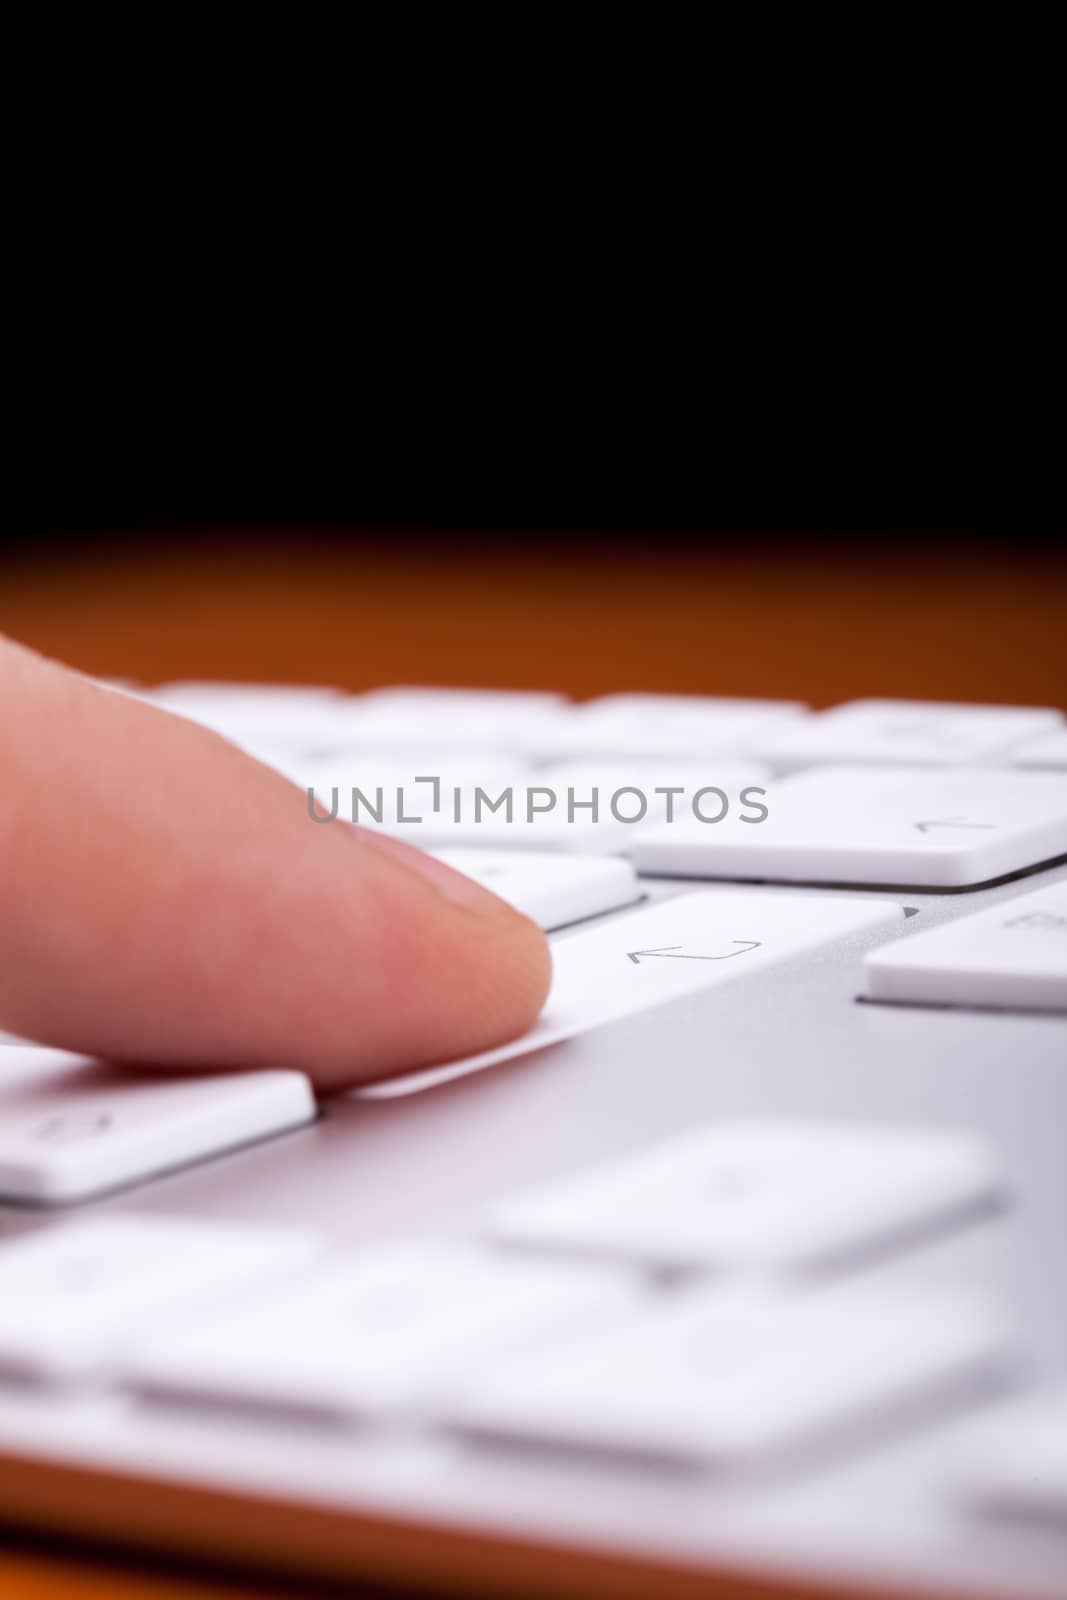 Finger pressing an enter button on alluminium keyboard with black copy space on top of it